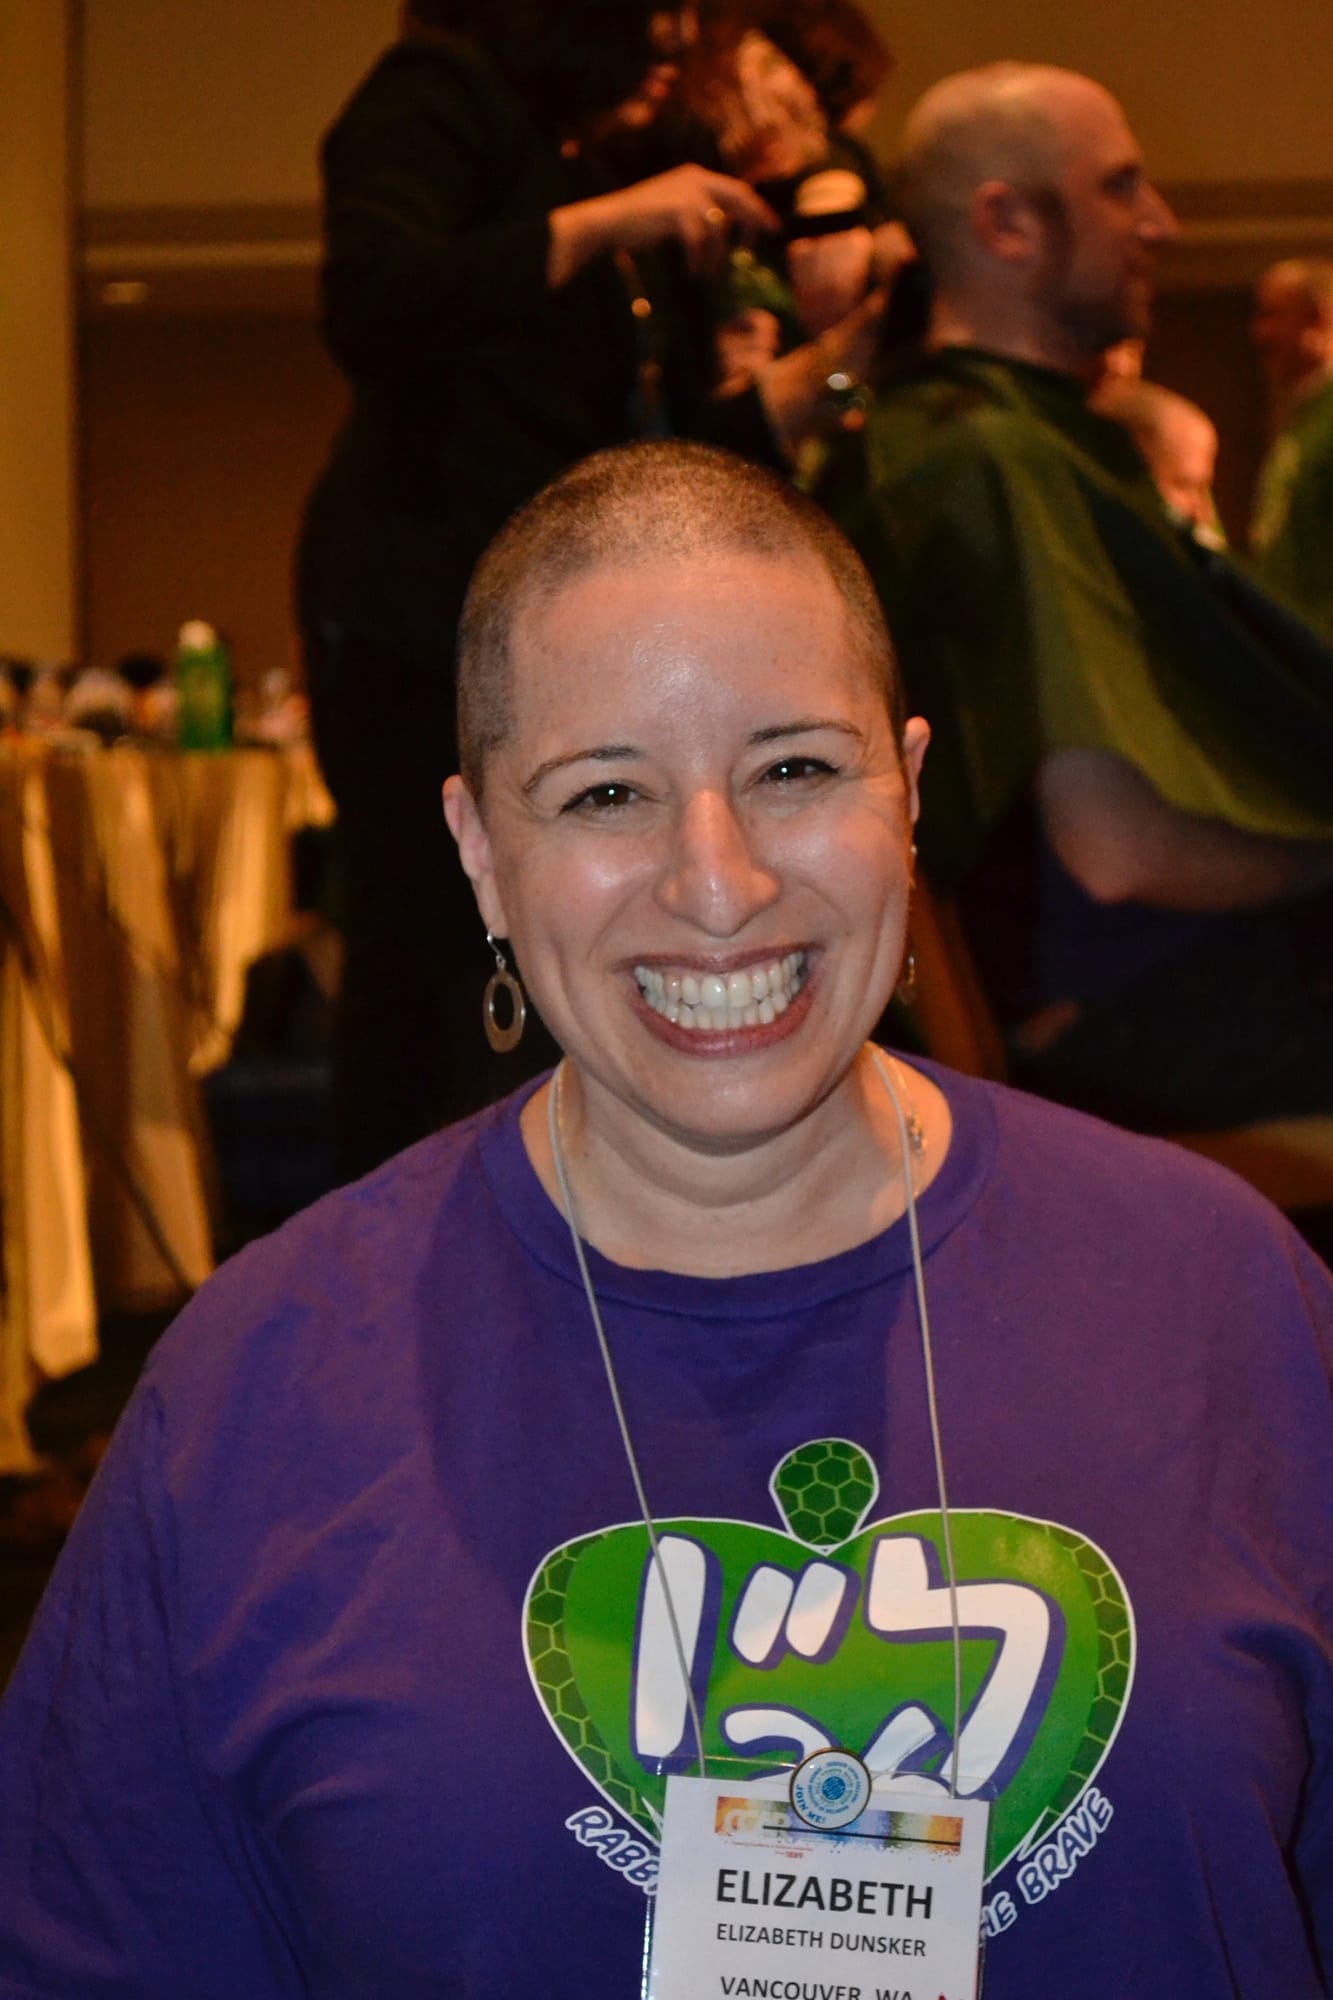 Glenwood: Before-and-after pictures show how Rabbi Elizabeth Dunsker of Congregation Kol Ami helped raise money for pediatric cancer research grants from the St. Baldrick's Foundation.